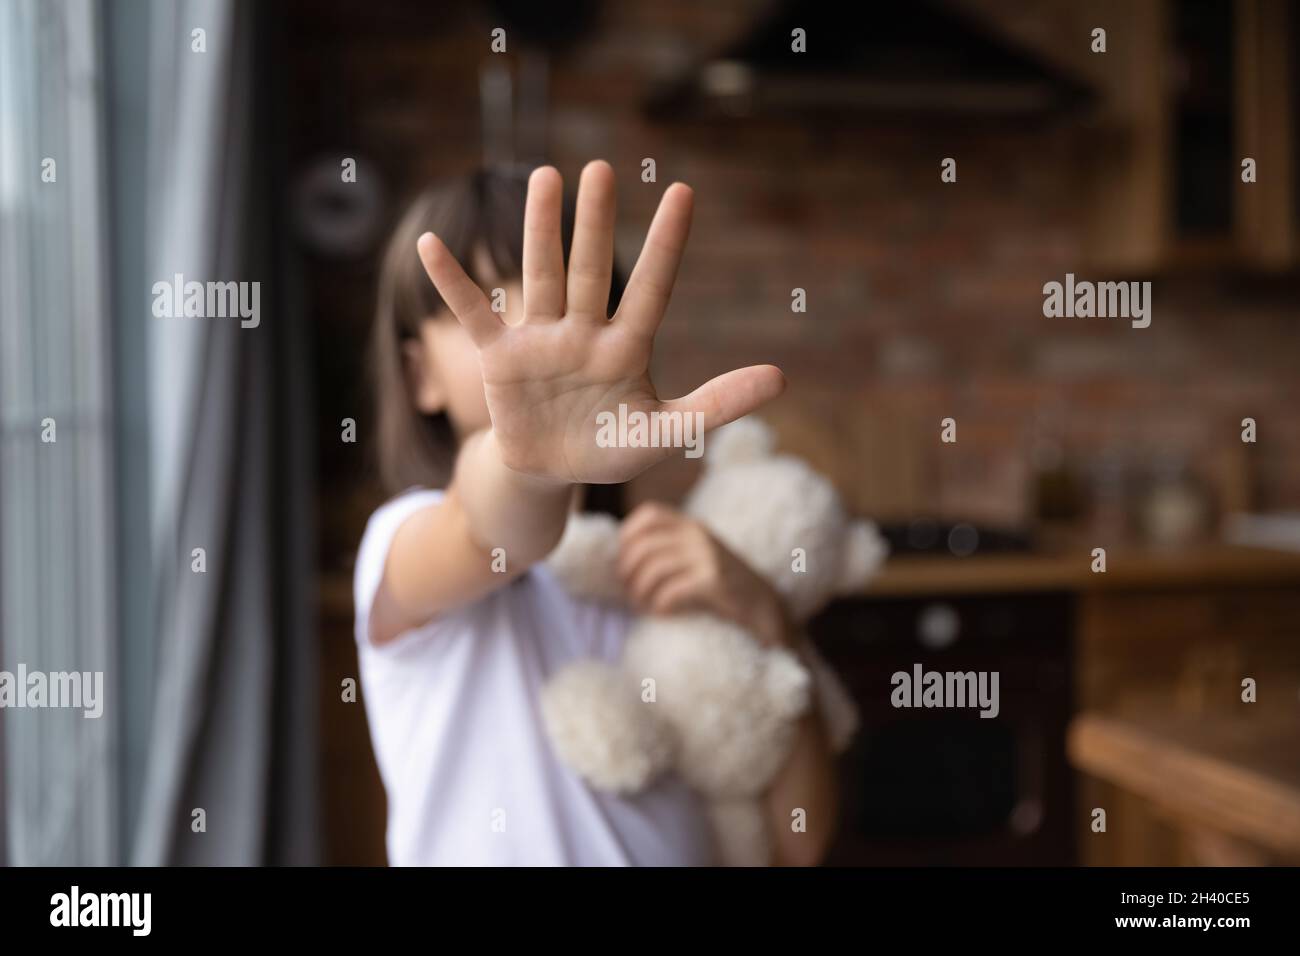 Scared little girl making no sign, showing hand stop gesture Stock Photo